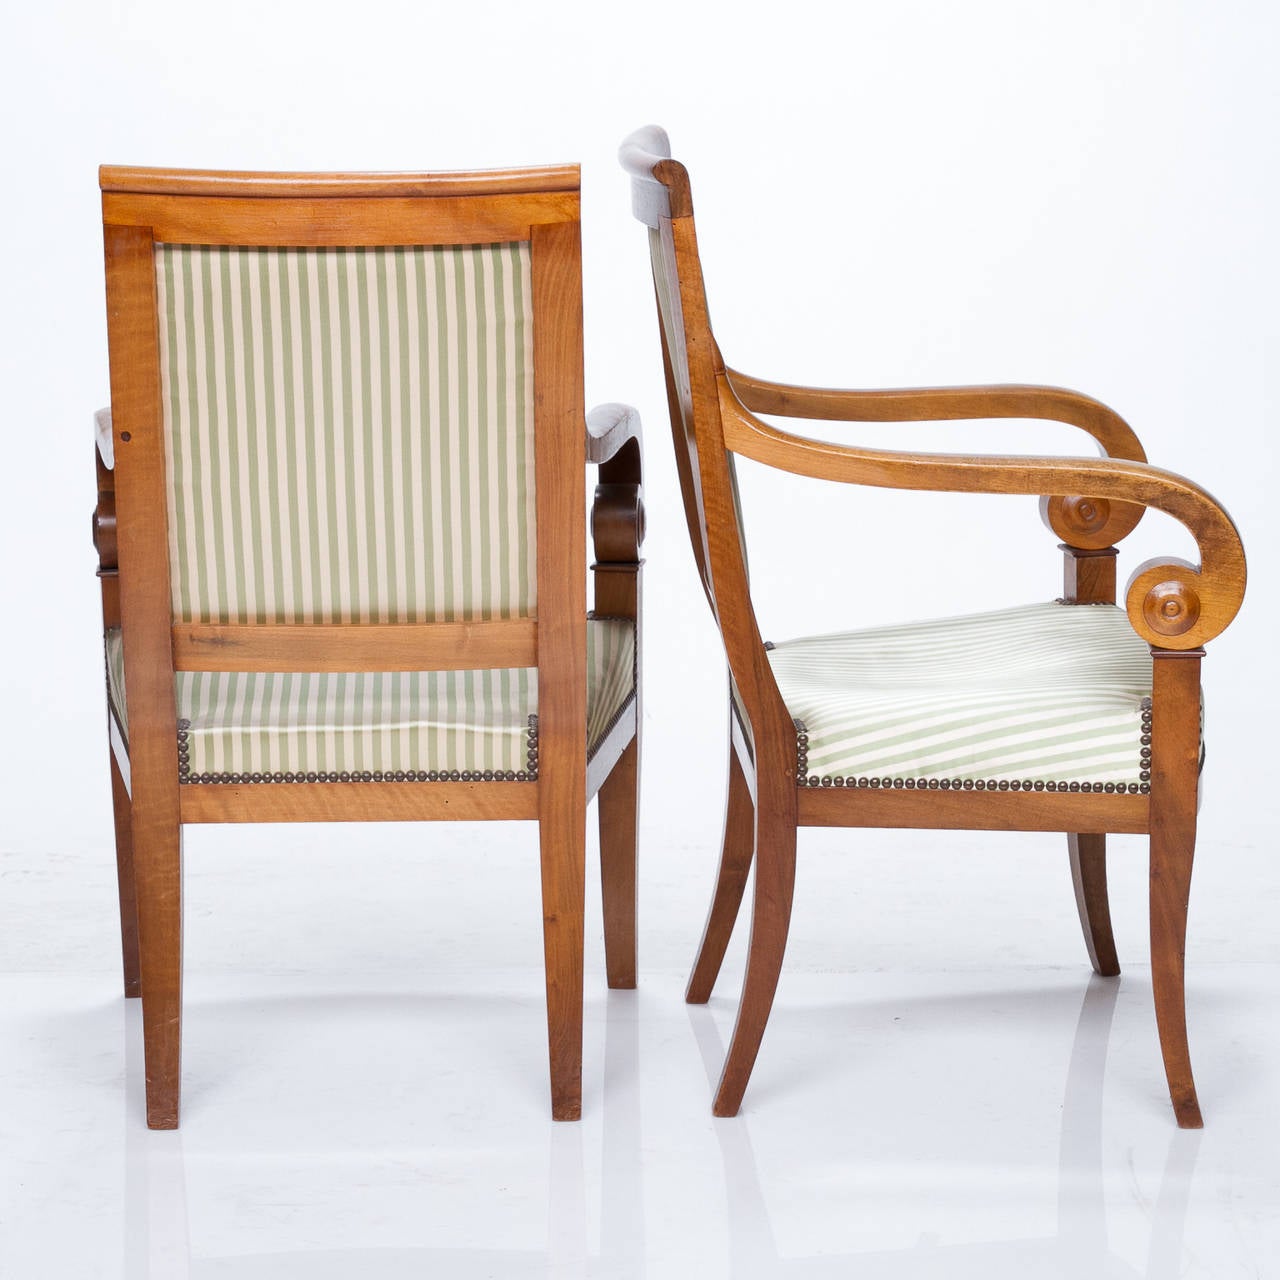 Heralding the Empire style, the furnishings of the Directoire period are elegant and gracious, reflecting the influence of Neo-Classicalism and the involvement with Italy. Hand-crafted from select French fruitwood, this exemplary pair of fauteuils